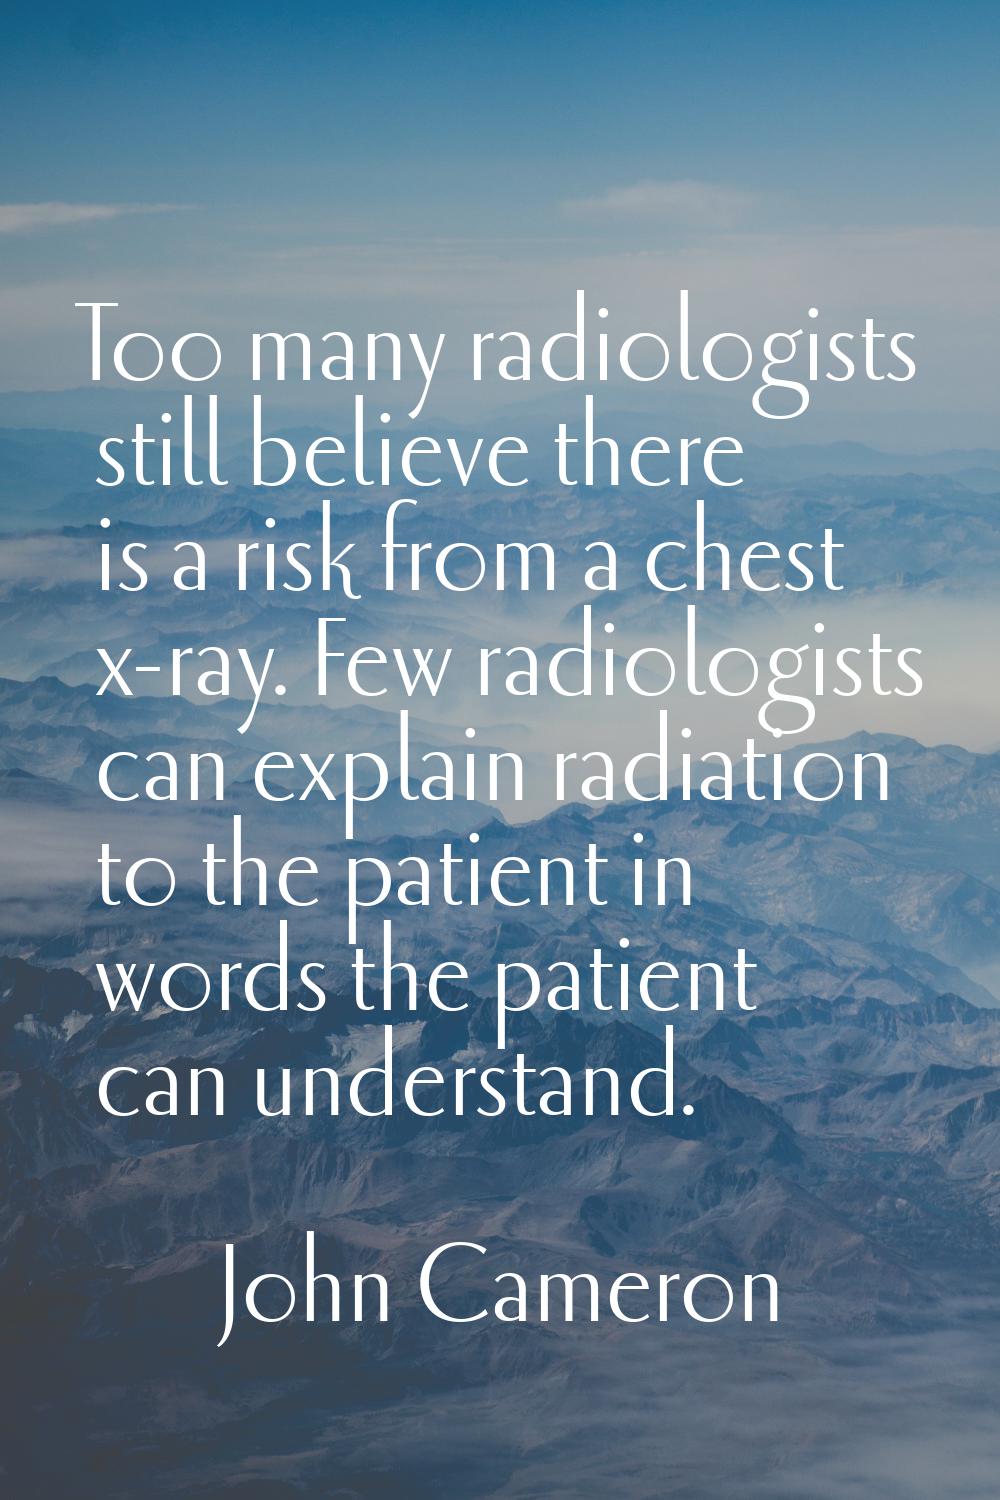 Too many radiologists still believe there is a risk from a chest x-ray. Few radiologists can explai